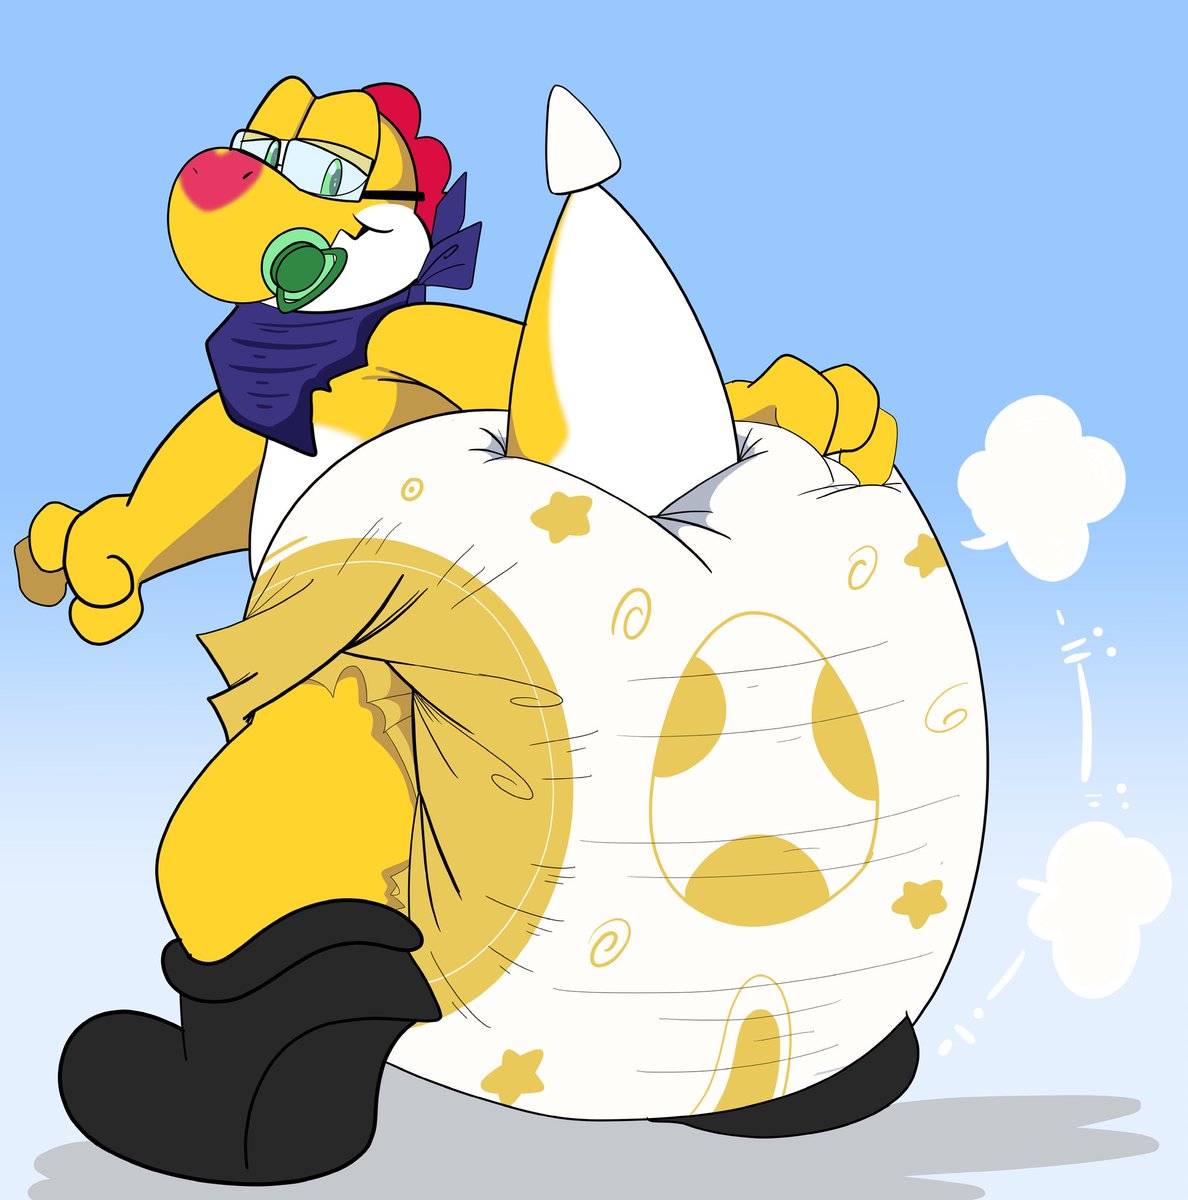 What's better than a massive diaper and a pacifier in a day off ? Get yourself comfortable as much as possible~

Commission I ordered from SrBunny649 over FA, big thanks to them again for this piece :3